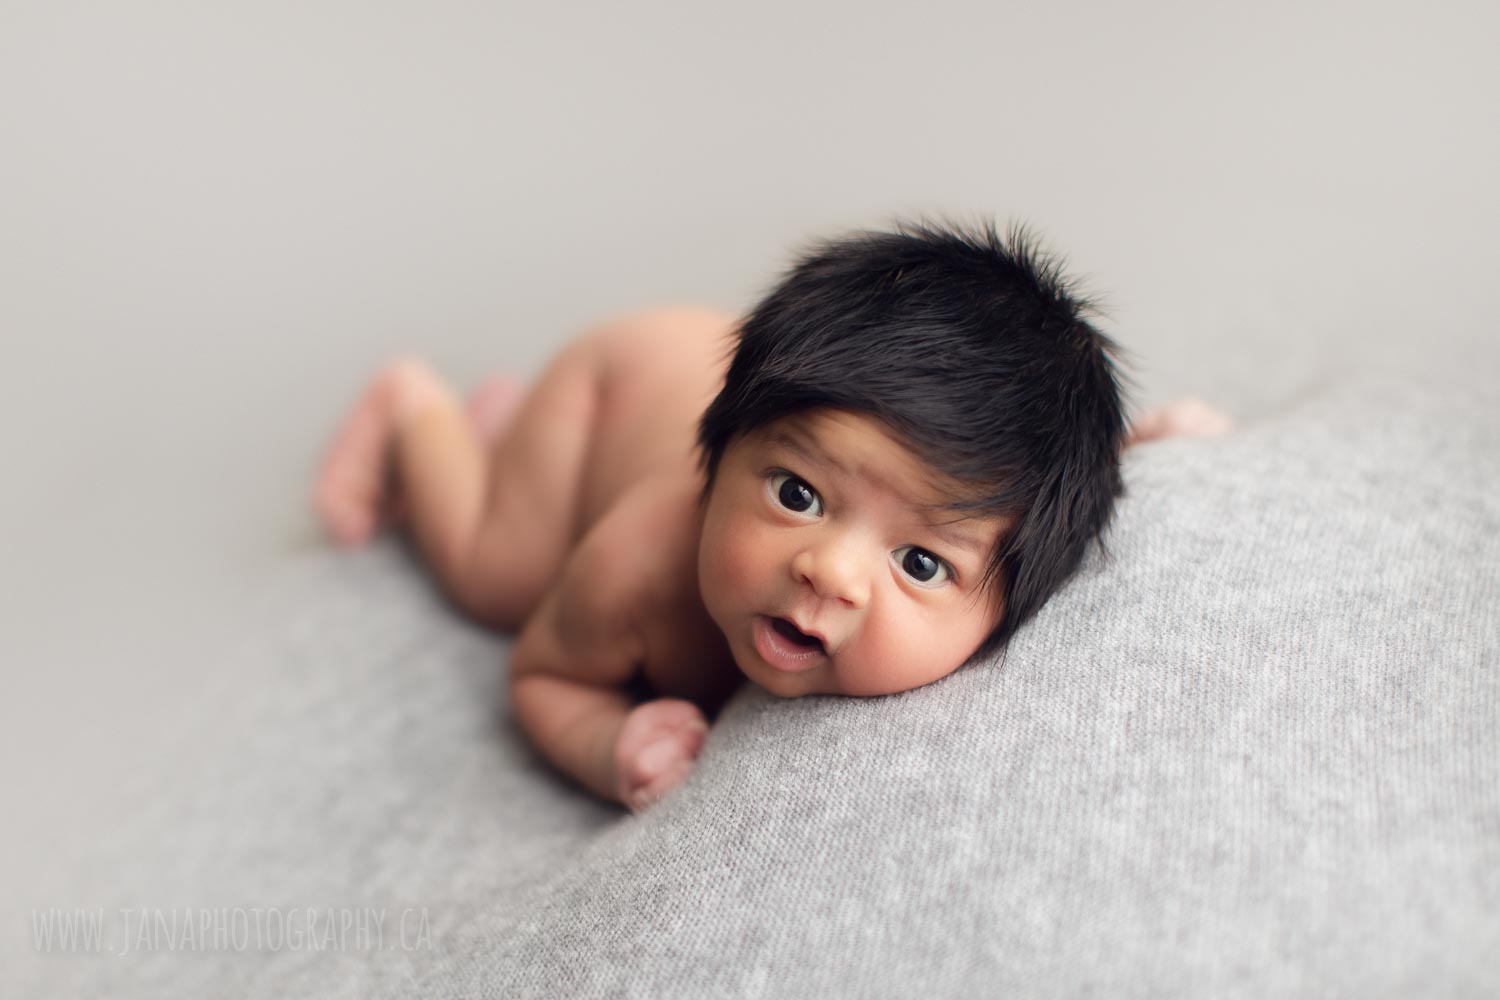 cutest baby photo captured in jana photography - vancouver - baby boy - open eyes